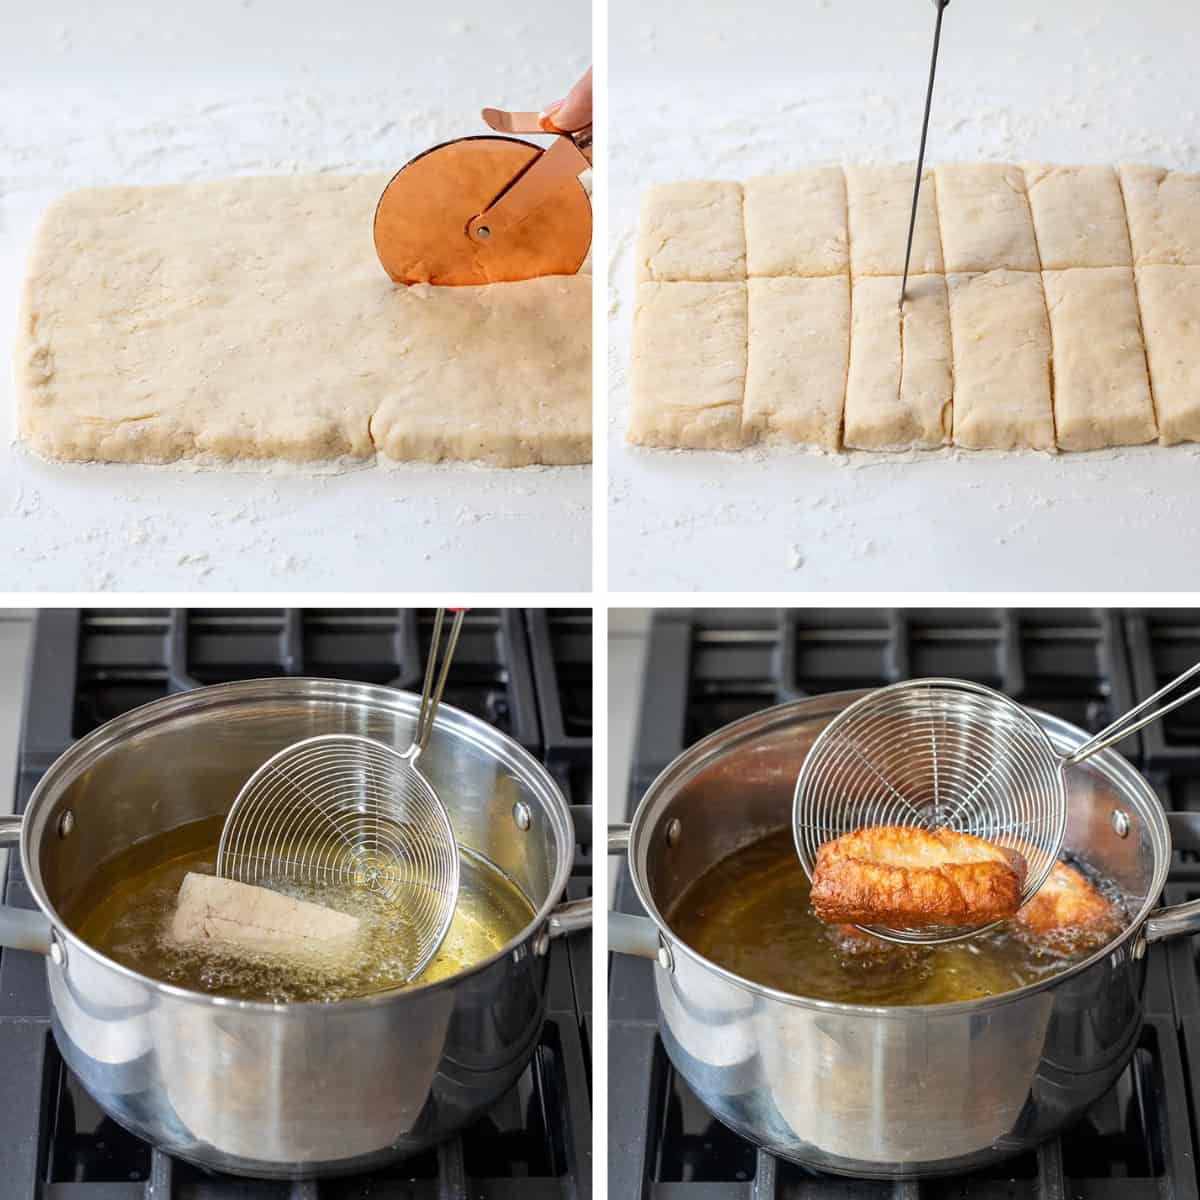 Steps for Rolling out Dough, Cutting Dough, Piercing Dough, and Frying Dough to Make Maple Bacon Donut Sticks.